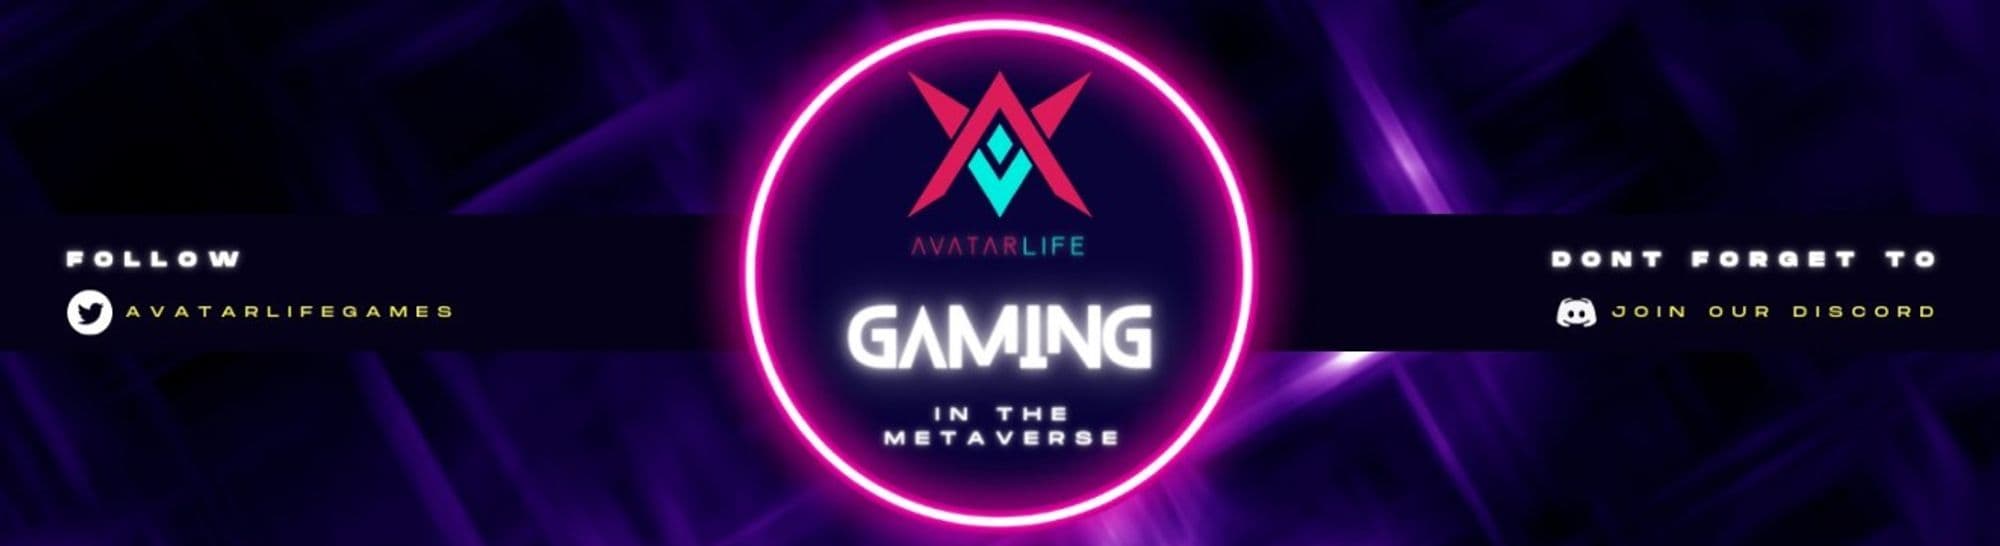 AvatarLife Cover Image